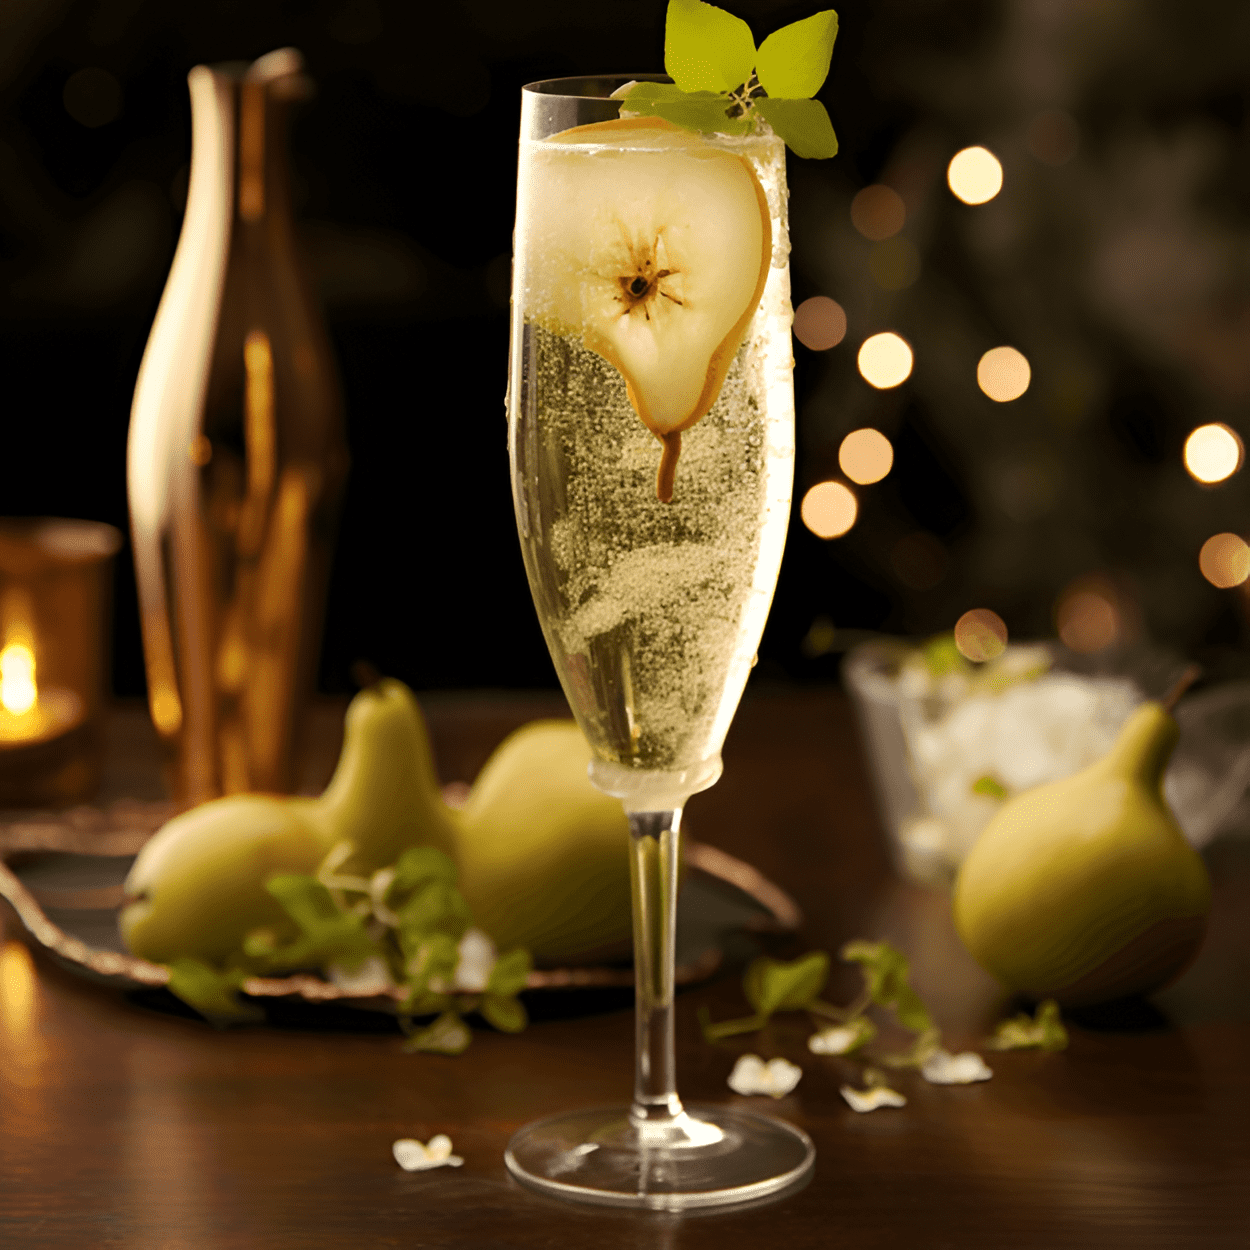 Spiced Pear French 75 Cocktail Recipe - This cocktail has a beautiful balance of sweet and sour, with a hint of spice. The pear flavor is prominent, complemented by the warmth of the spices. It's a light and refreshing drink, with a bit of a kick from the gin.